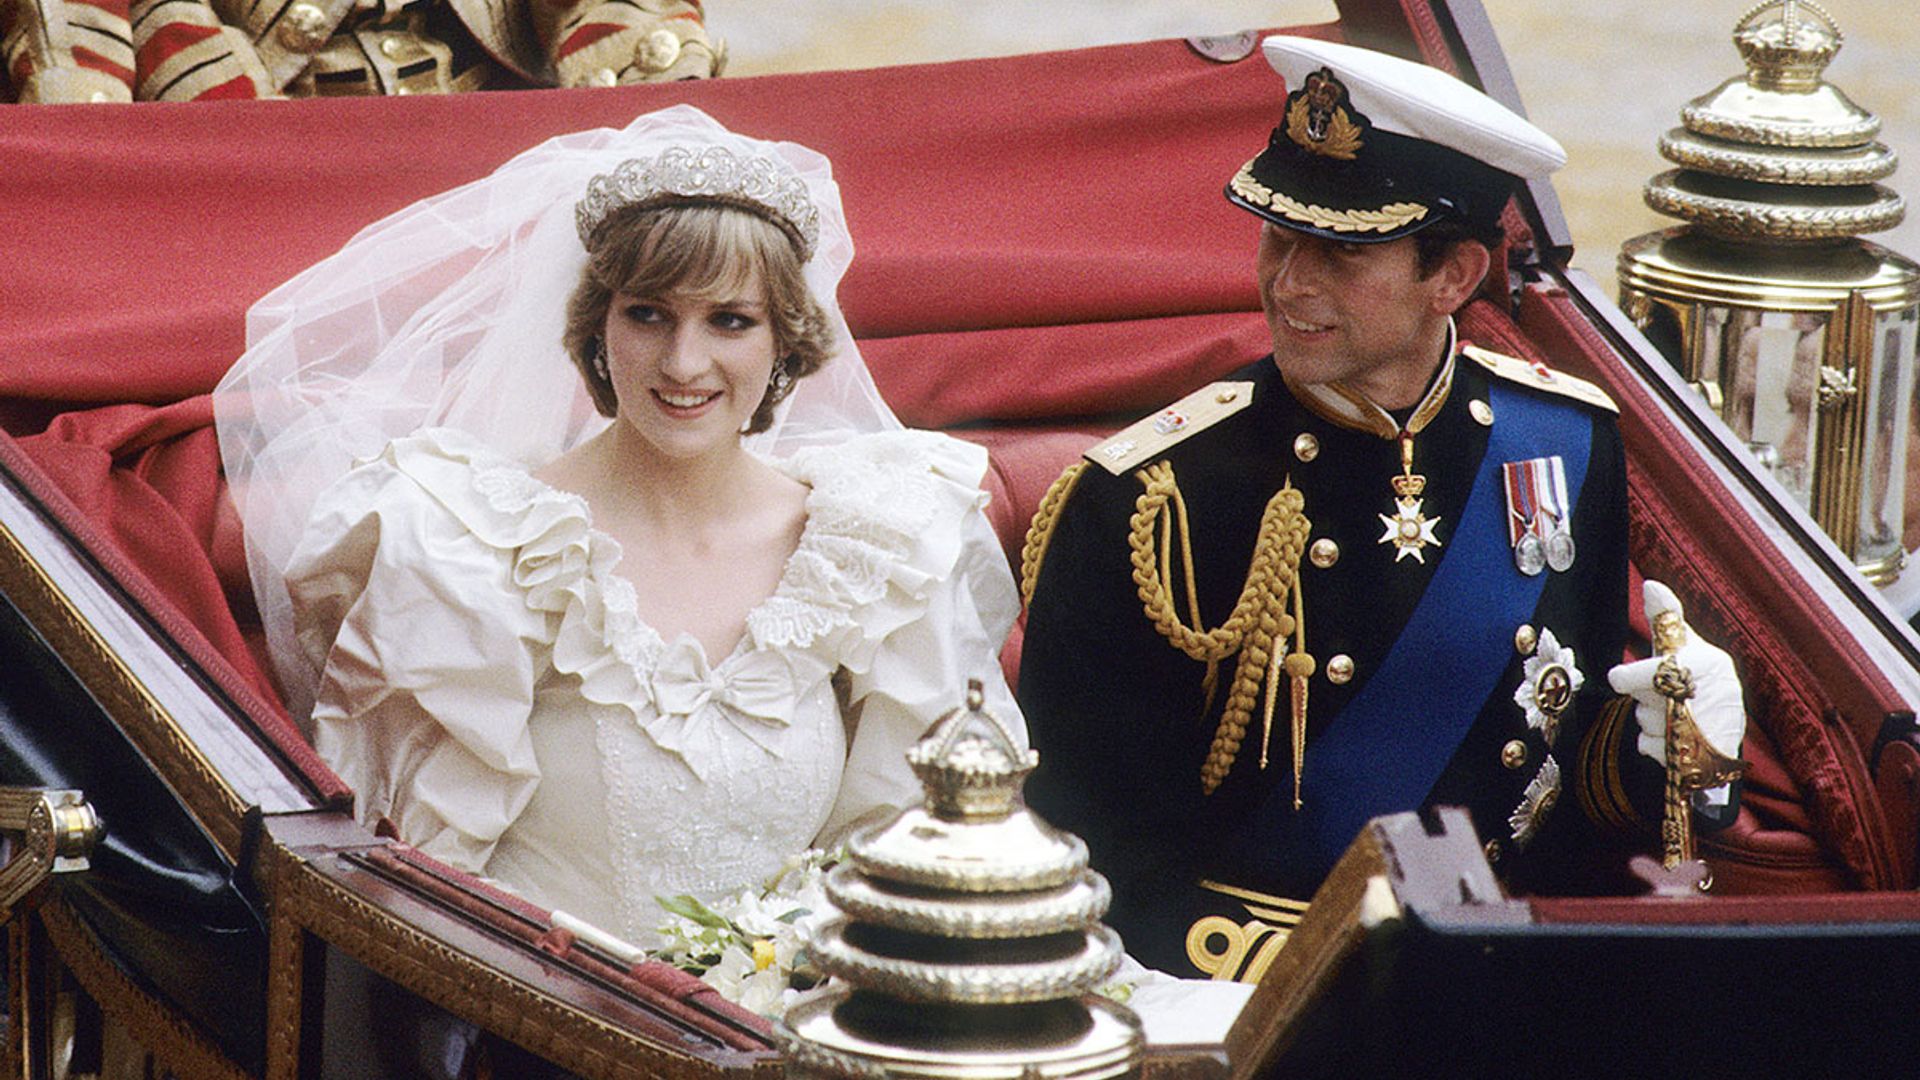 Would you buy a slice of Princess Diana's wedding cake for £400?